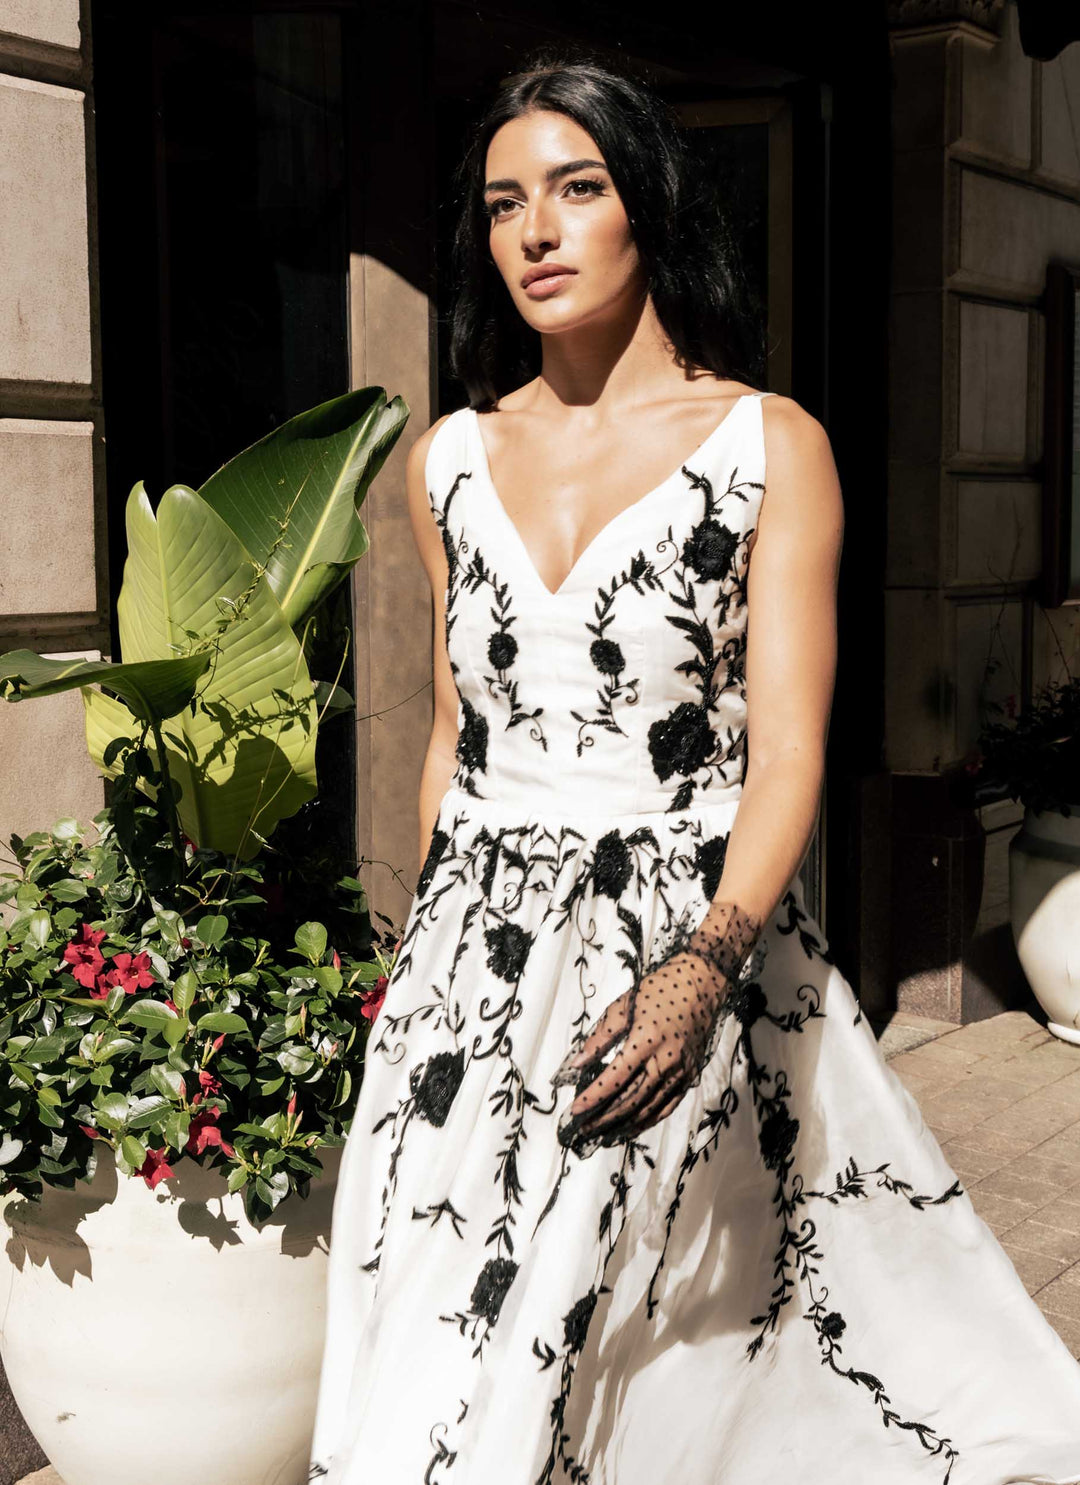 A ornate black and white Sujata Gazder dress on a model in the street